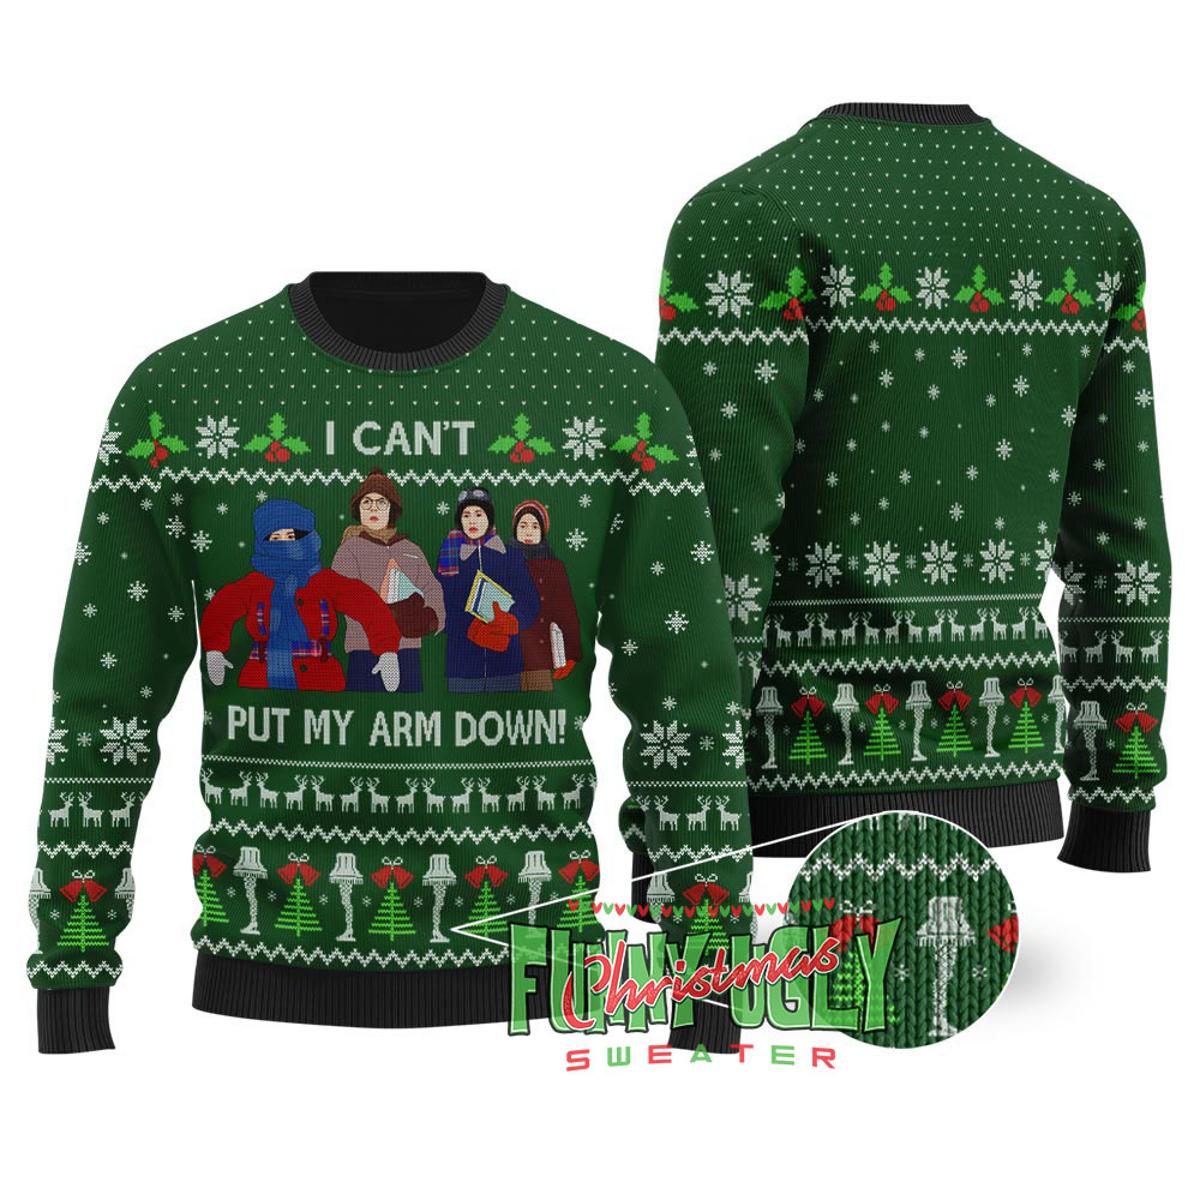 How You Doing Die Hard Christmas Sweater